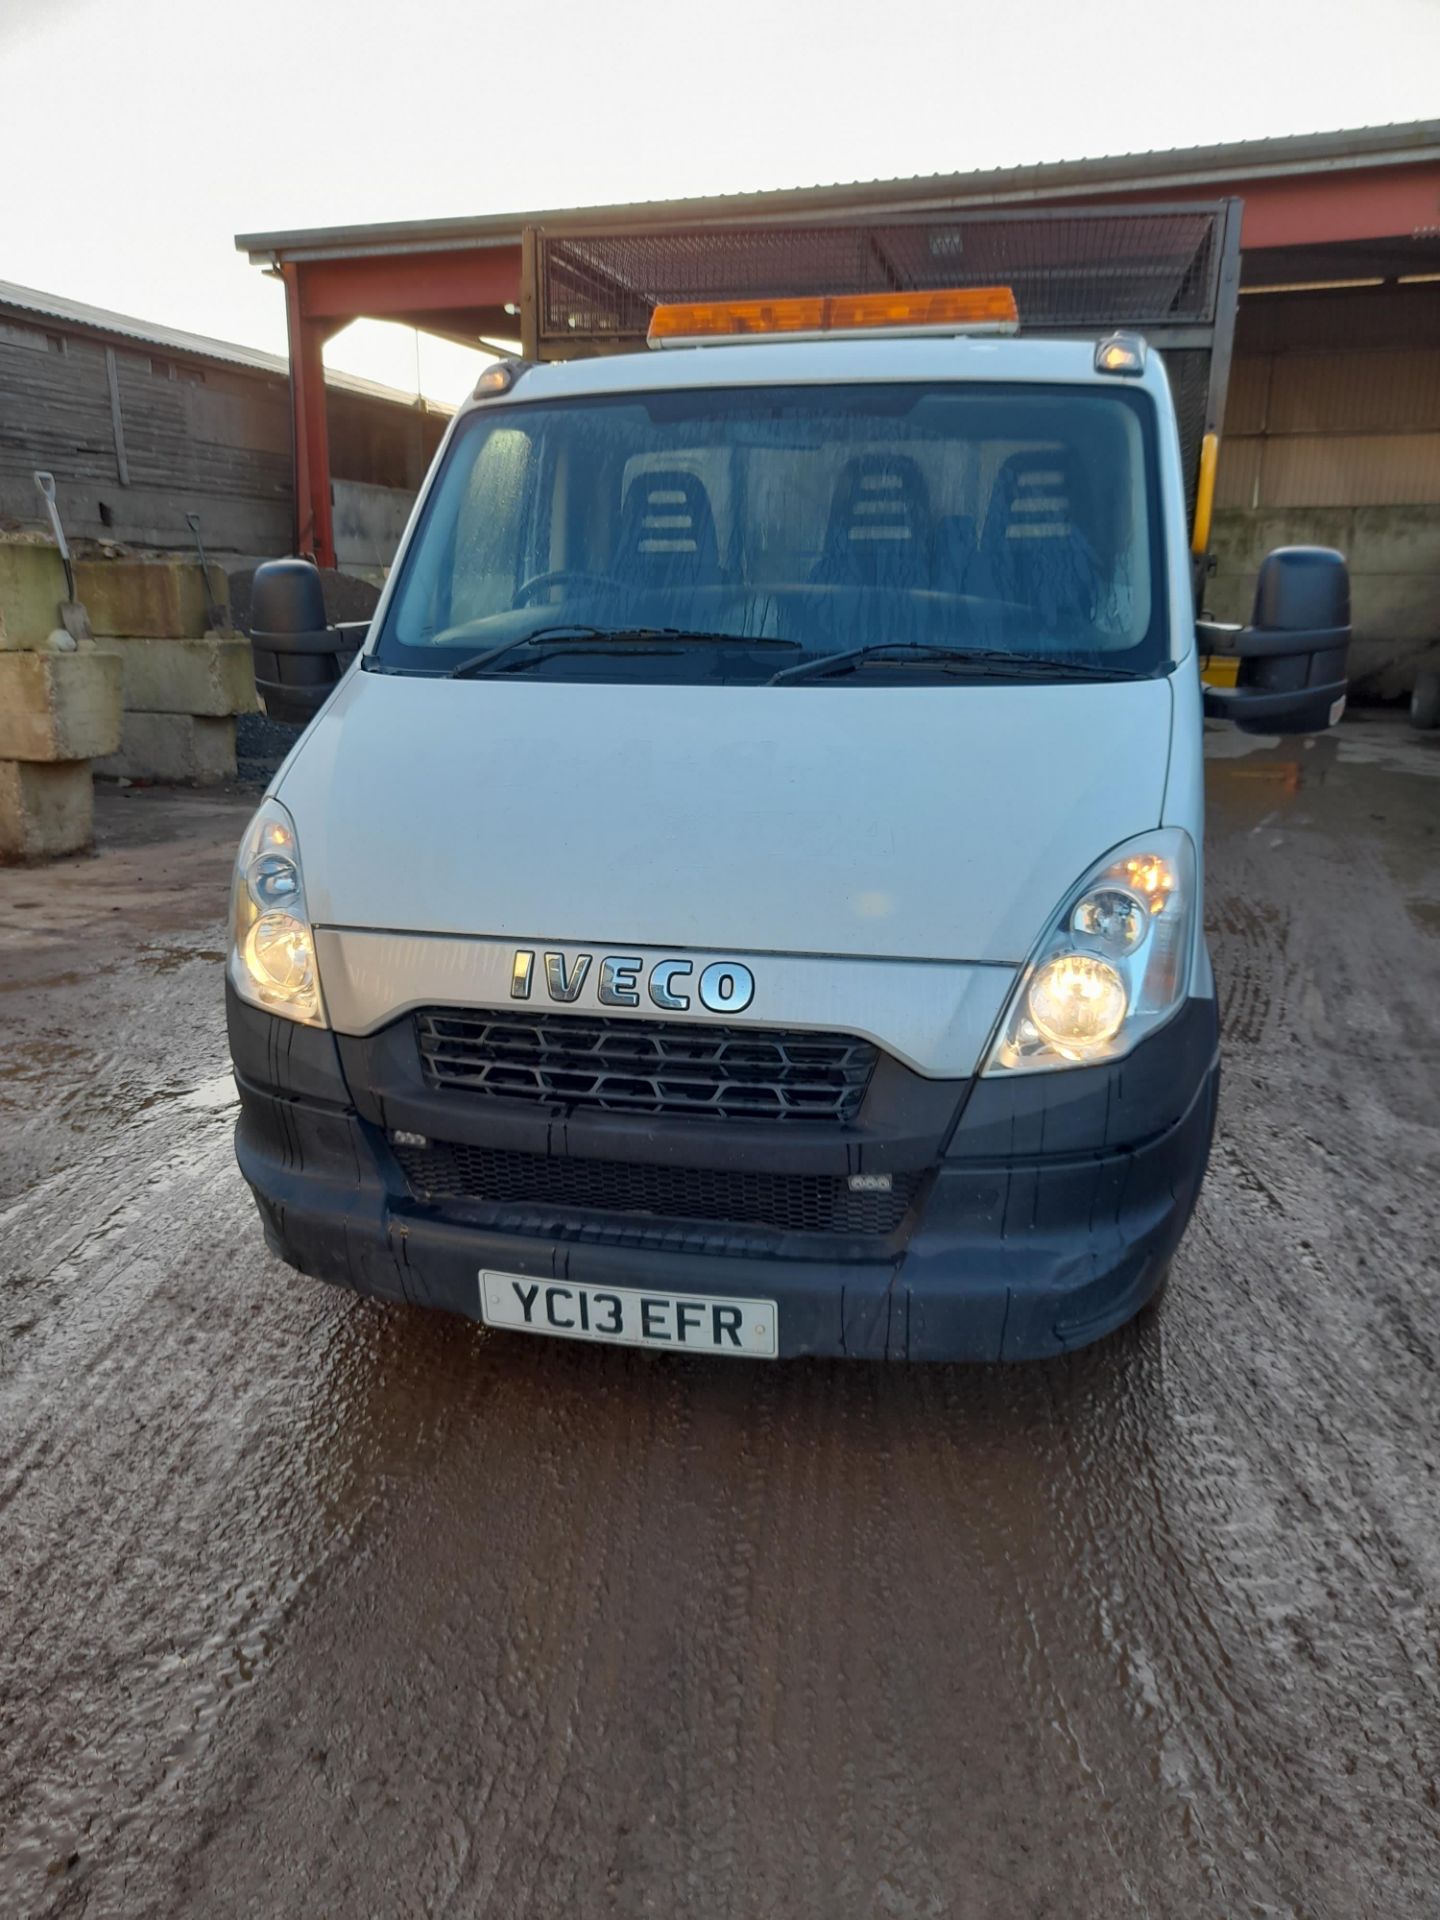 Iveco Daily 35C15 MWB Cage Tipper Van with Tail Lift and Spenborough Engineering cage, s/n 2373, - Image 13 of 13